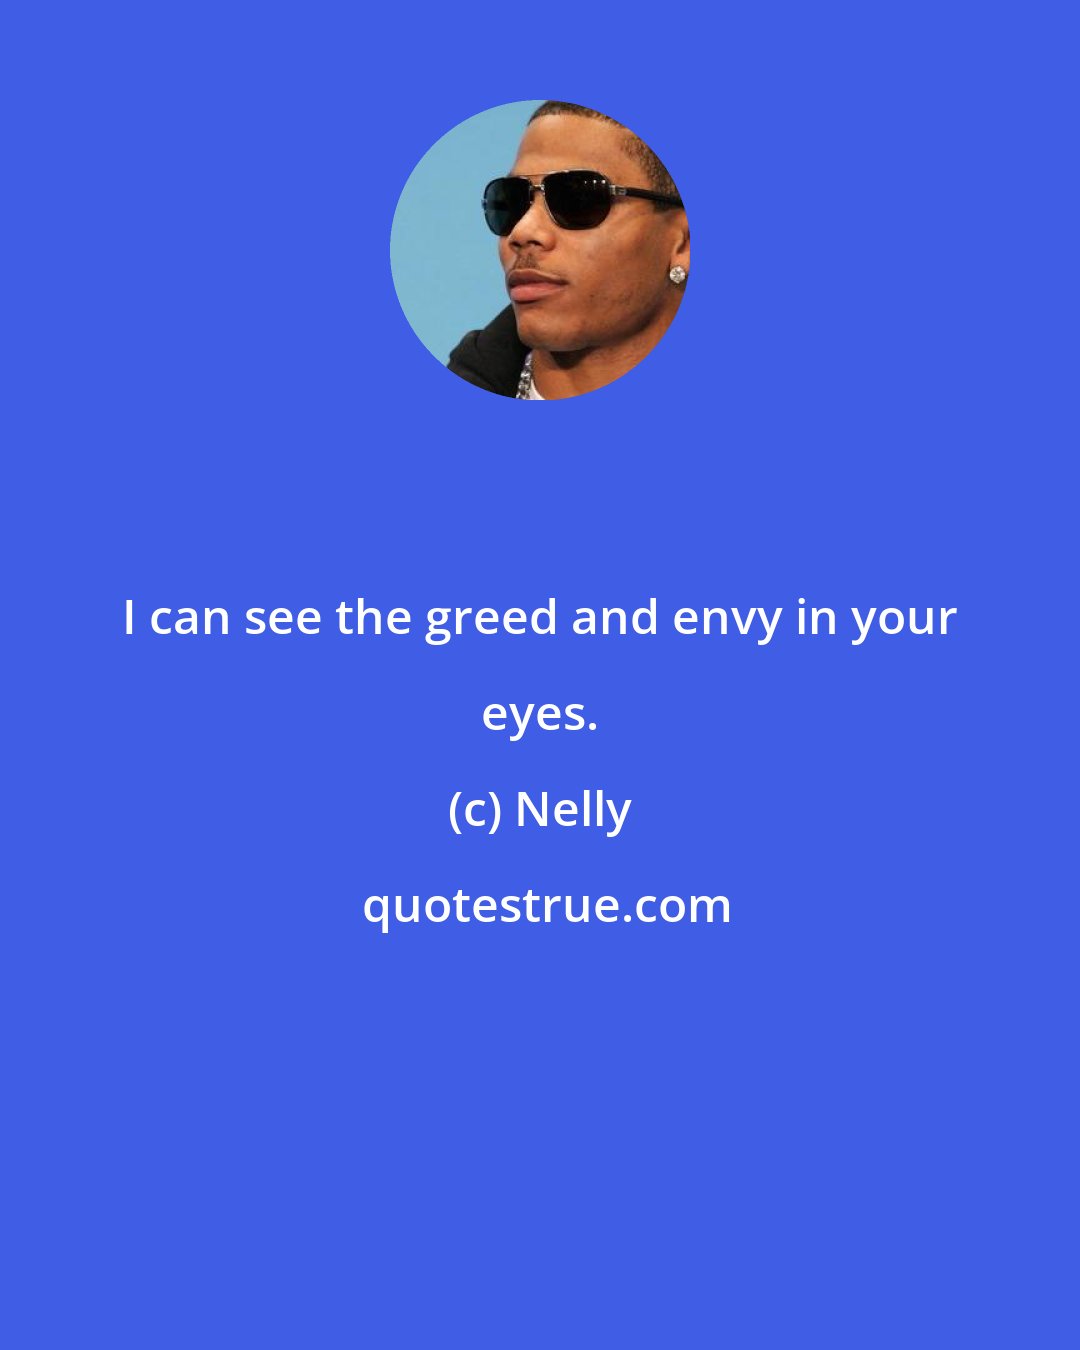 Nelly: I can see the greed and envy in your eyes.